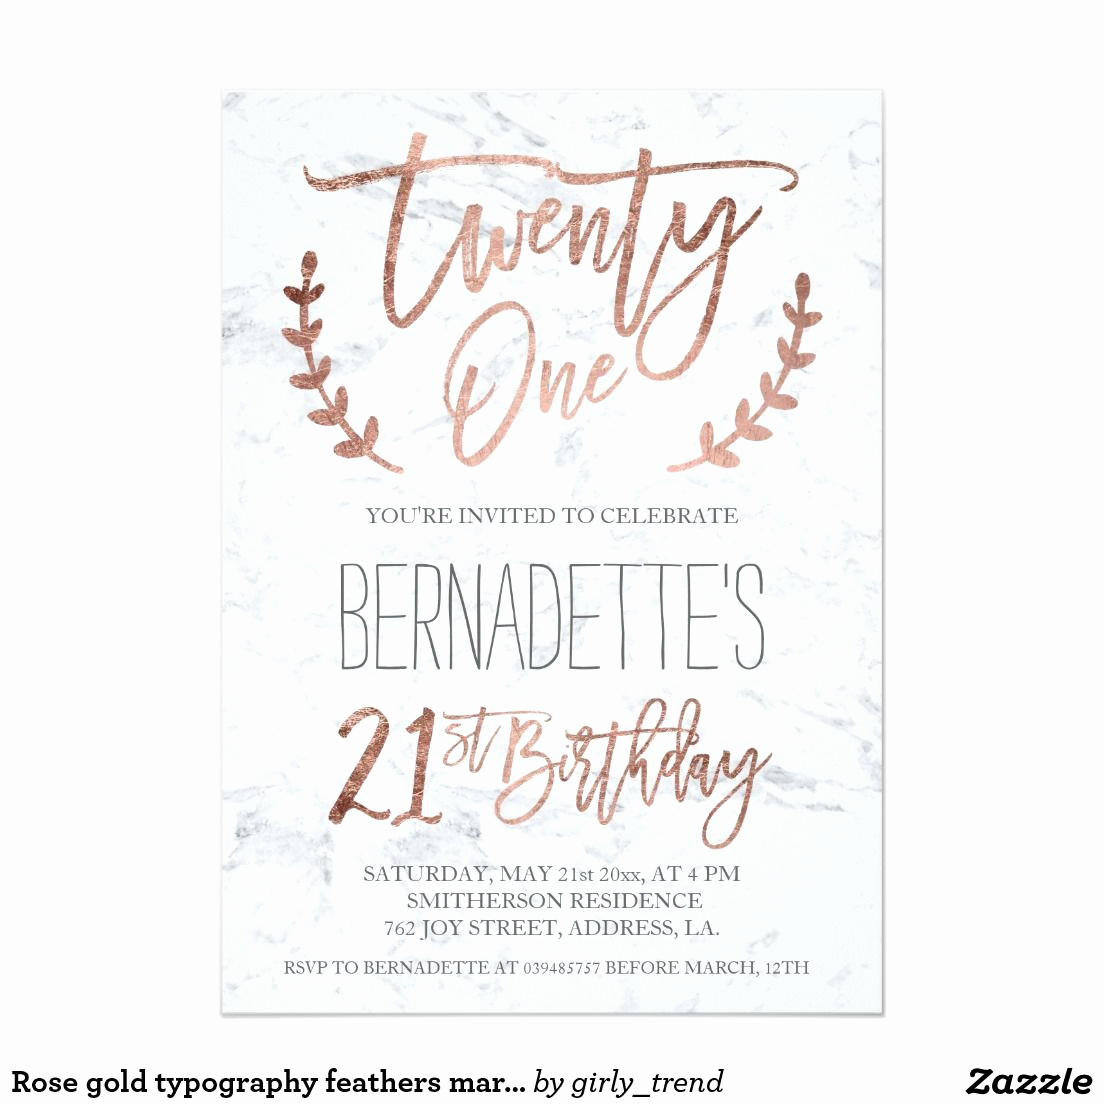 Birthday Invitation Card Ideas Awesome Rose Gold Typography Feathers Marble 21st Birthday